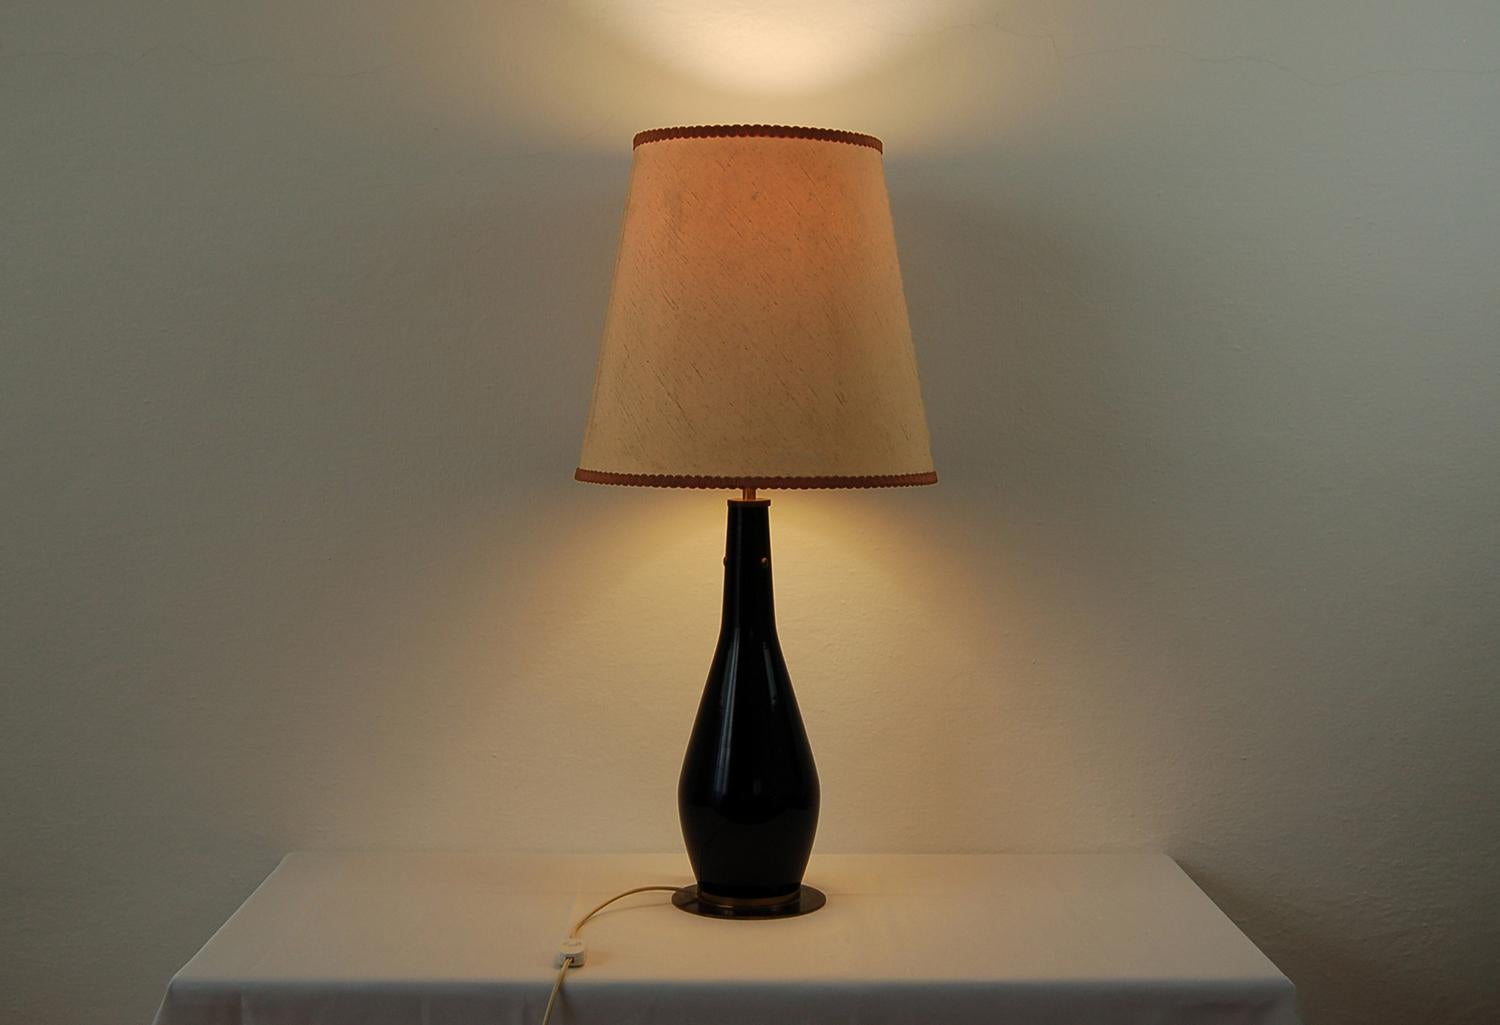 Mid-Century Modern Table Lamp in Black Glass and Fabric Lampshade by Stilnovo 1950s For Sale